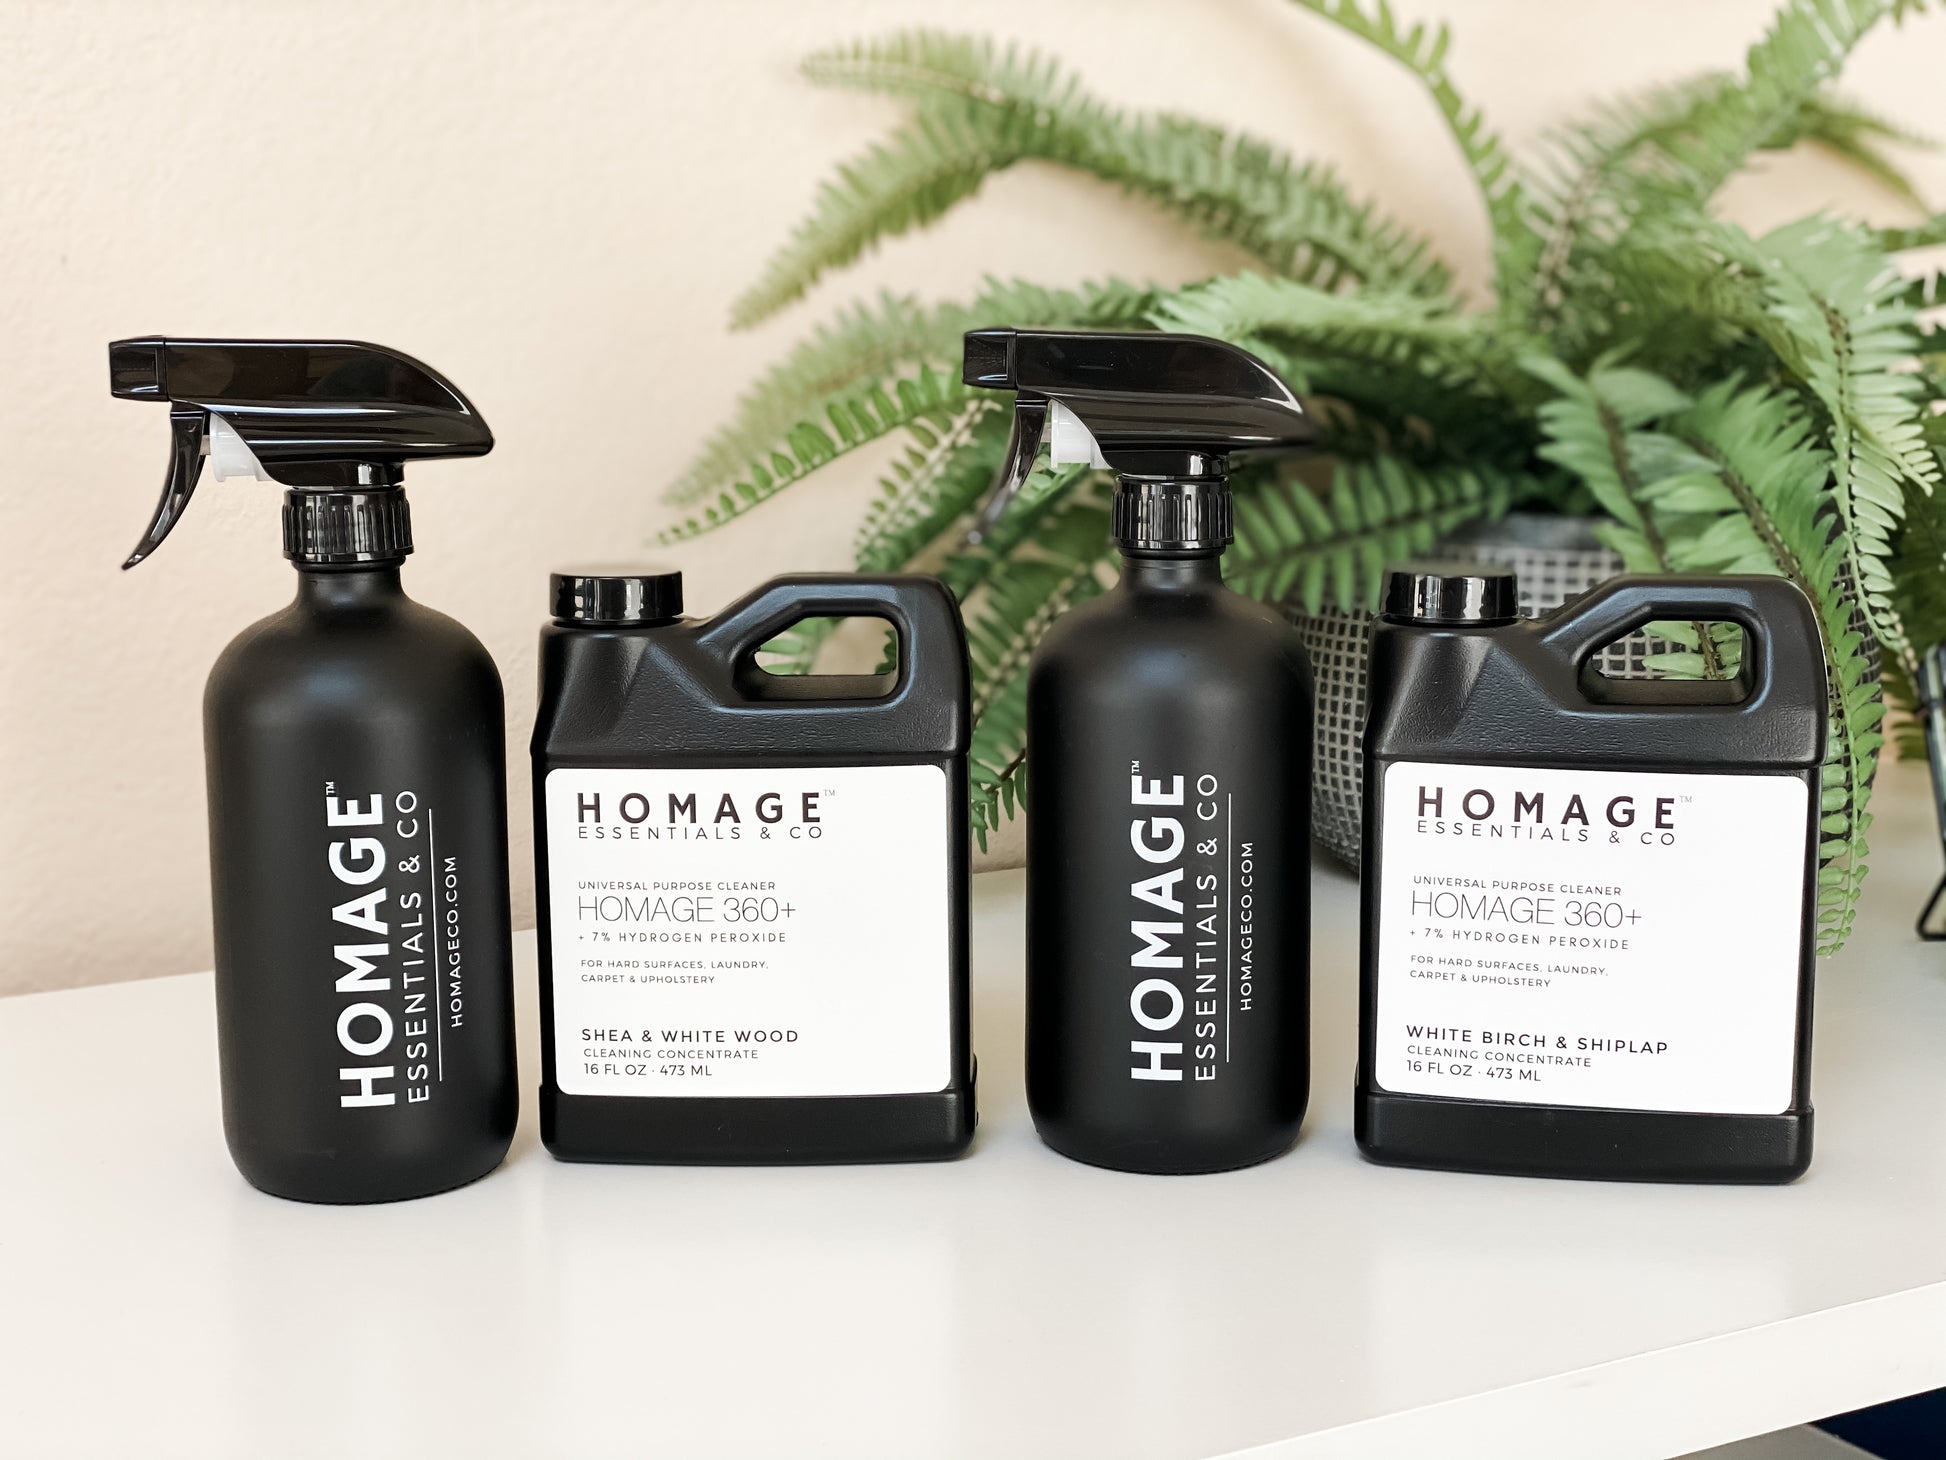 Homage 360+ 7% Hydrogen Peroxide Universal Cleaning Concentrate Starter Kit - Homage Essentials & Co